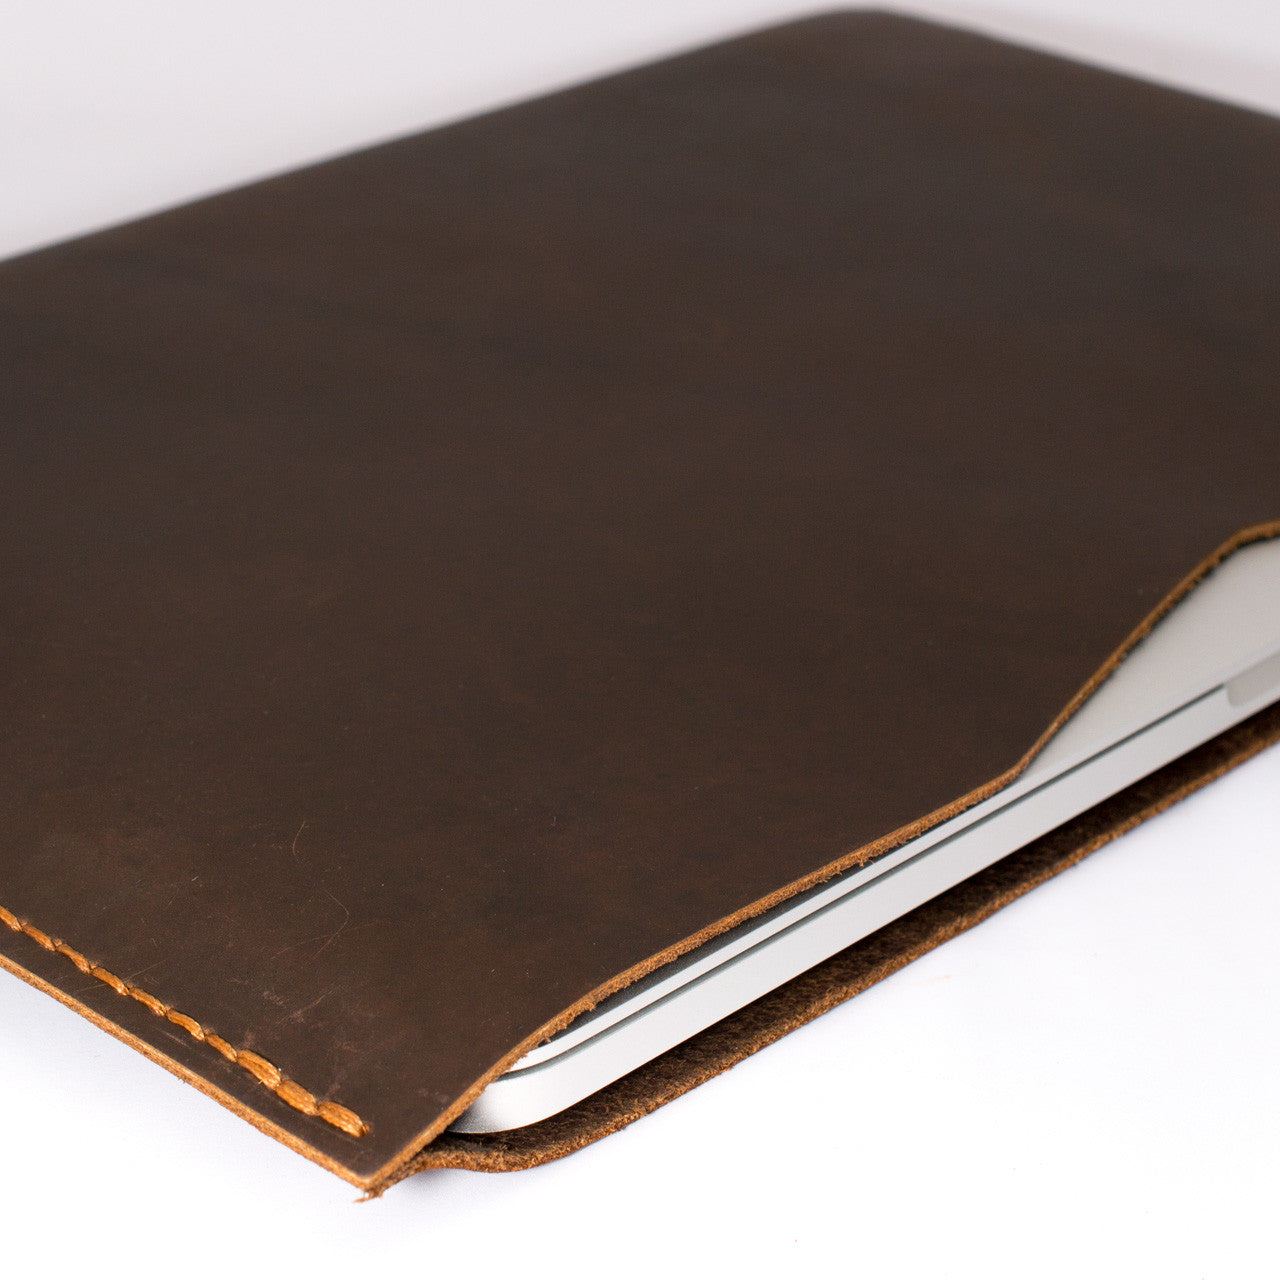 BASIC // MARRON: Leather Dell XPS laptop Sleeve Case by Capra Leather